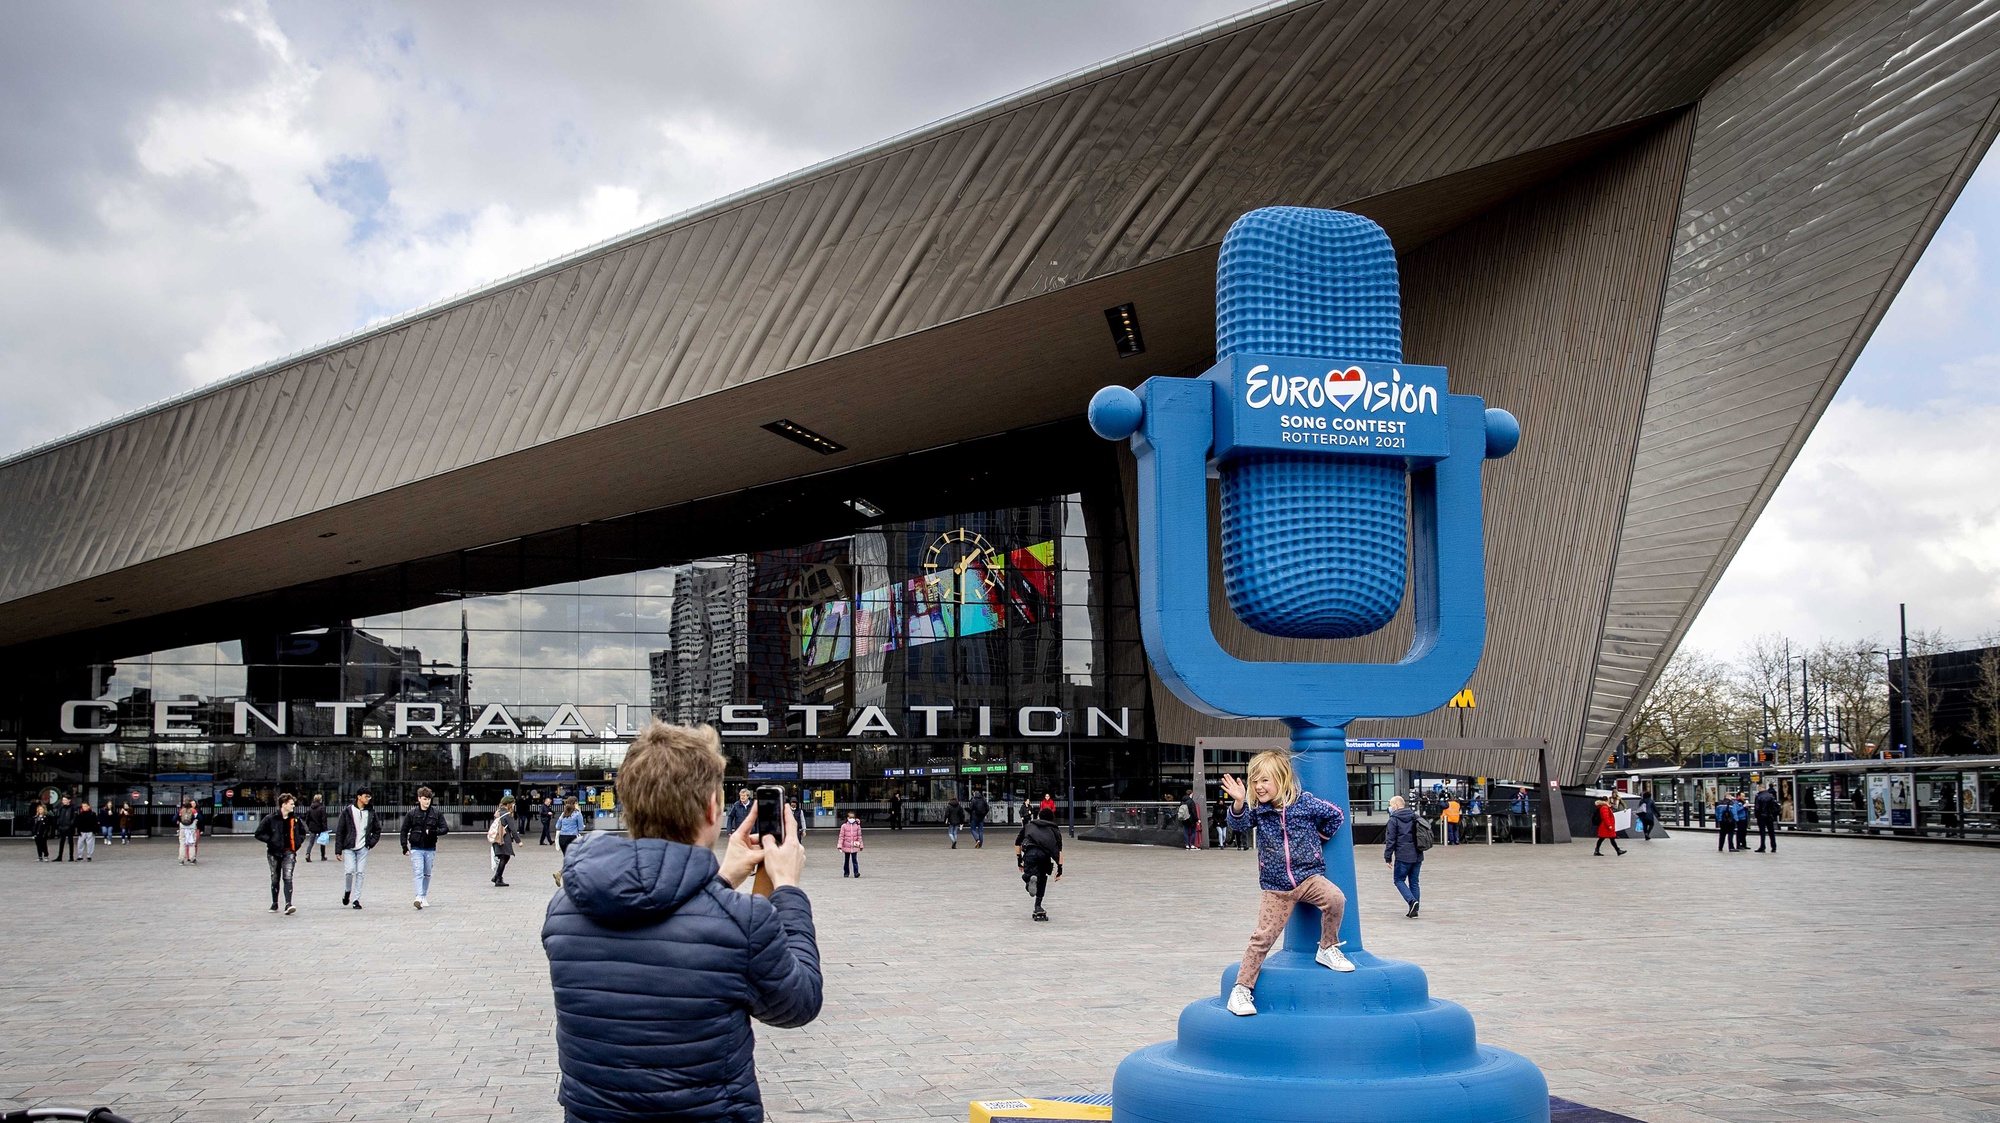 epa09183839 People take pictures next to a four-meter high, 3D-printed Eurovision trophy in front of Central Station made from recycled PET material from the Rotterdam waters, in Rotterdam, the Netherlands, 07 May 2021. The trophy will be auctioned after the Eurovision Song Contest. The 65th edition of the Eurovision Song Contest (ESC) will take place at the Rotterdam Ahoy and consist of two semi-finals, to be held on 18 and 20 May 2021, and a grand final on 22 May 2021.  EPA/SEM VAN DER WEL